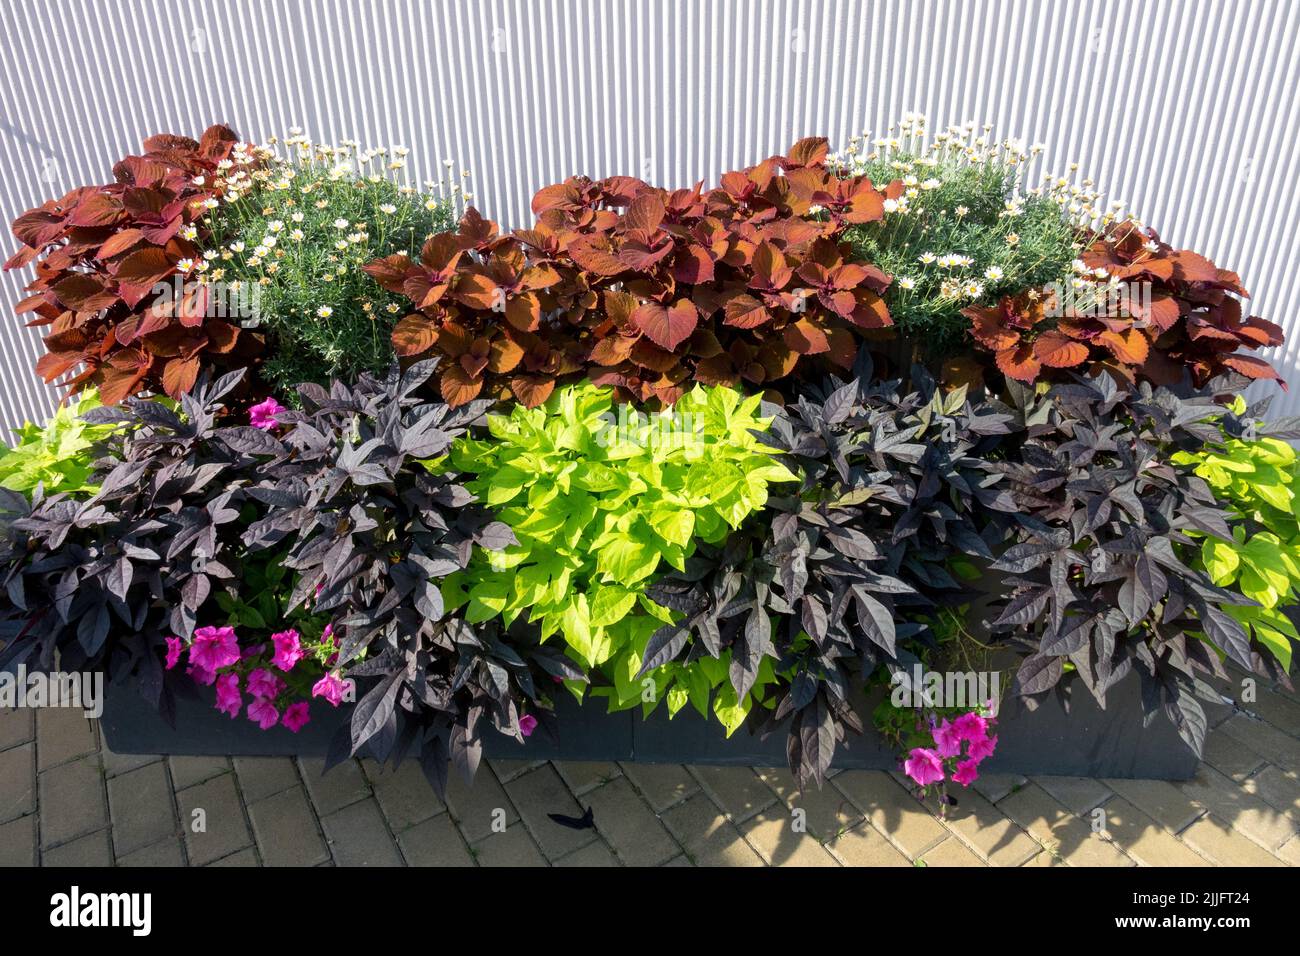 Annual plants container Painted Nettle, Coleus, Ipomoea batatas "Blackie", the colour contrast of planted plants summer flower container Stock Photo